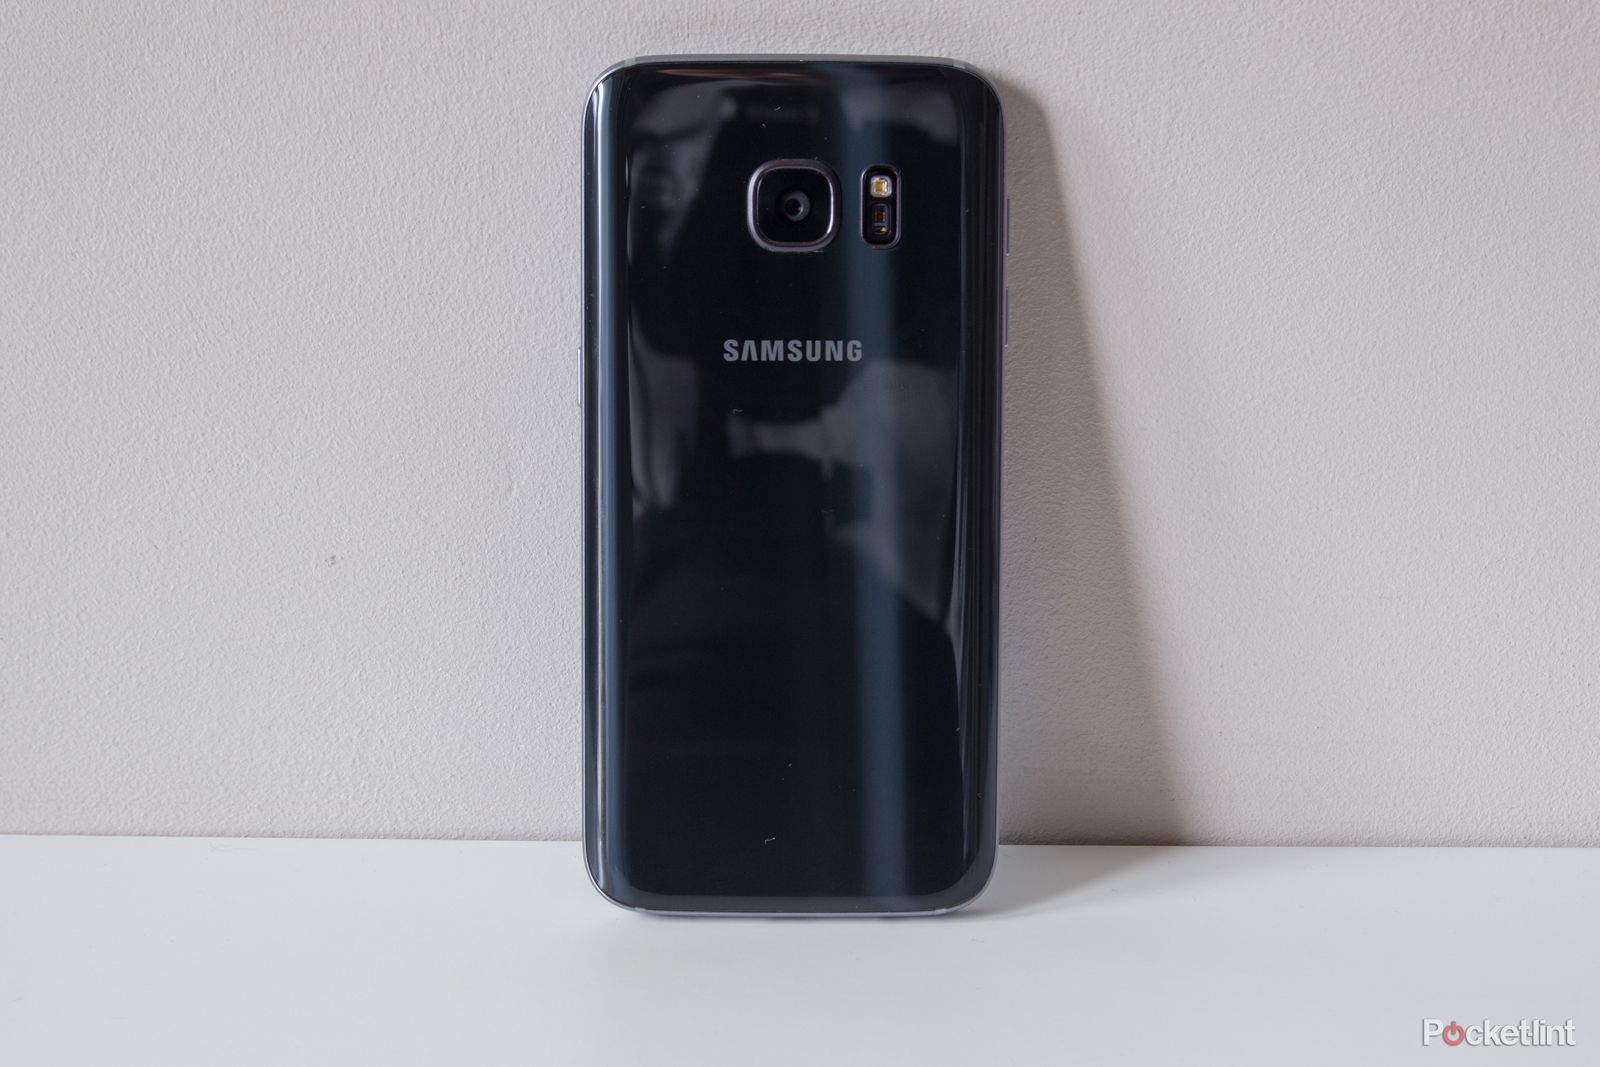 samsung galaxy s8 specs leak 30mp camera snapdragon 830 processor and built in projector image 1